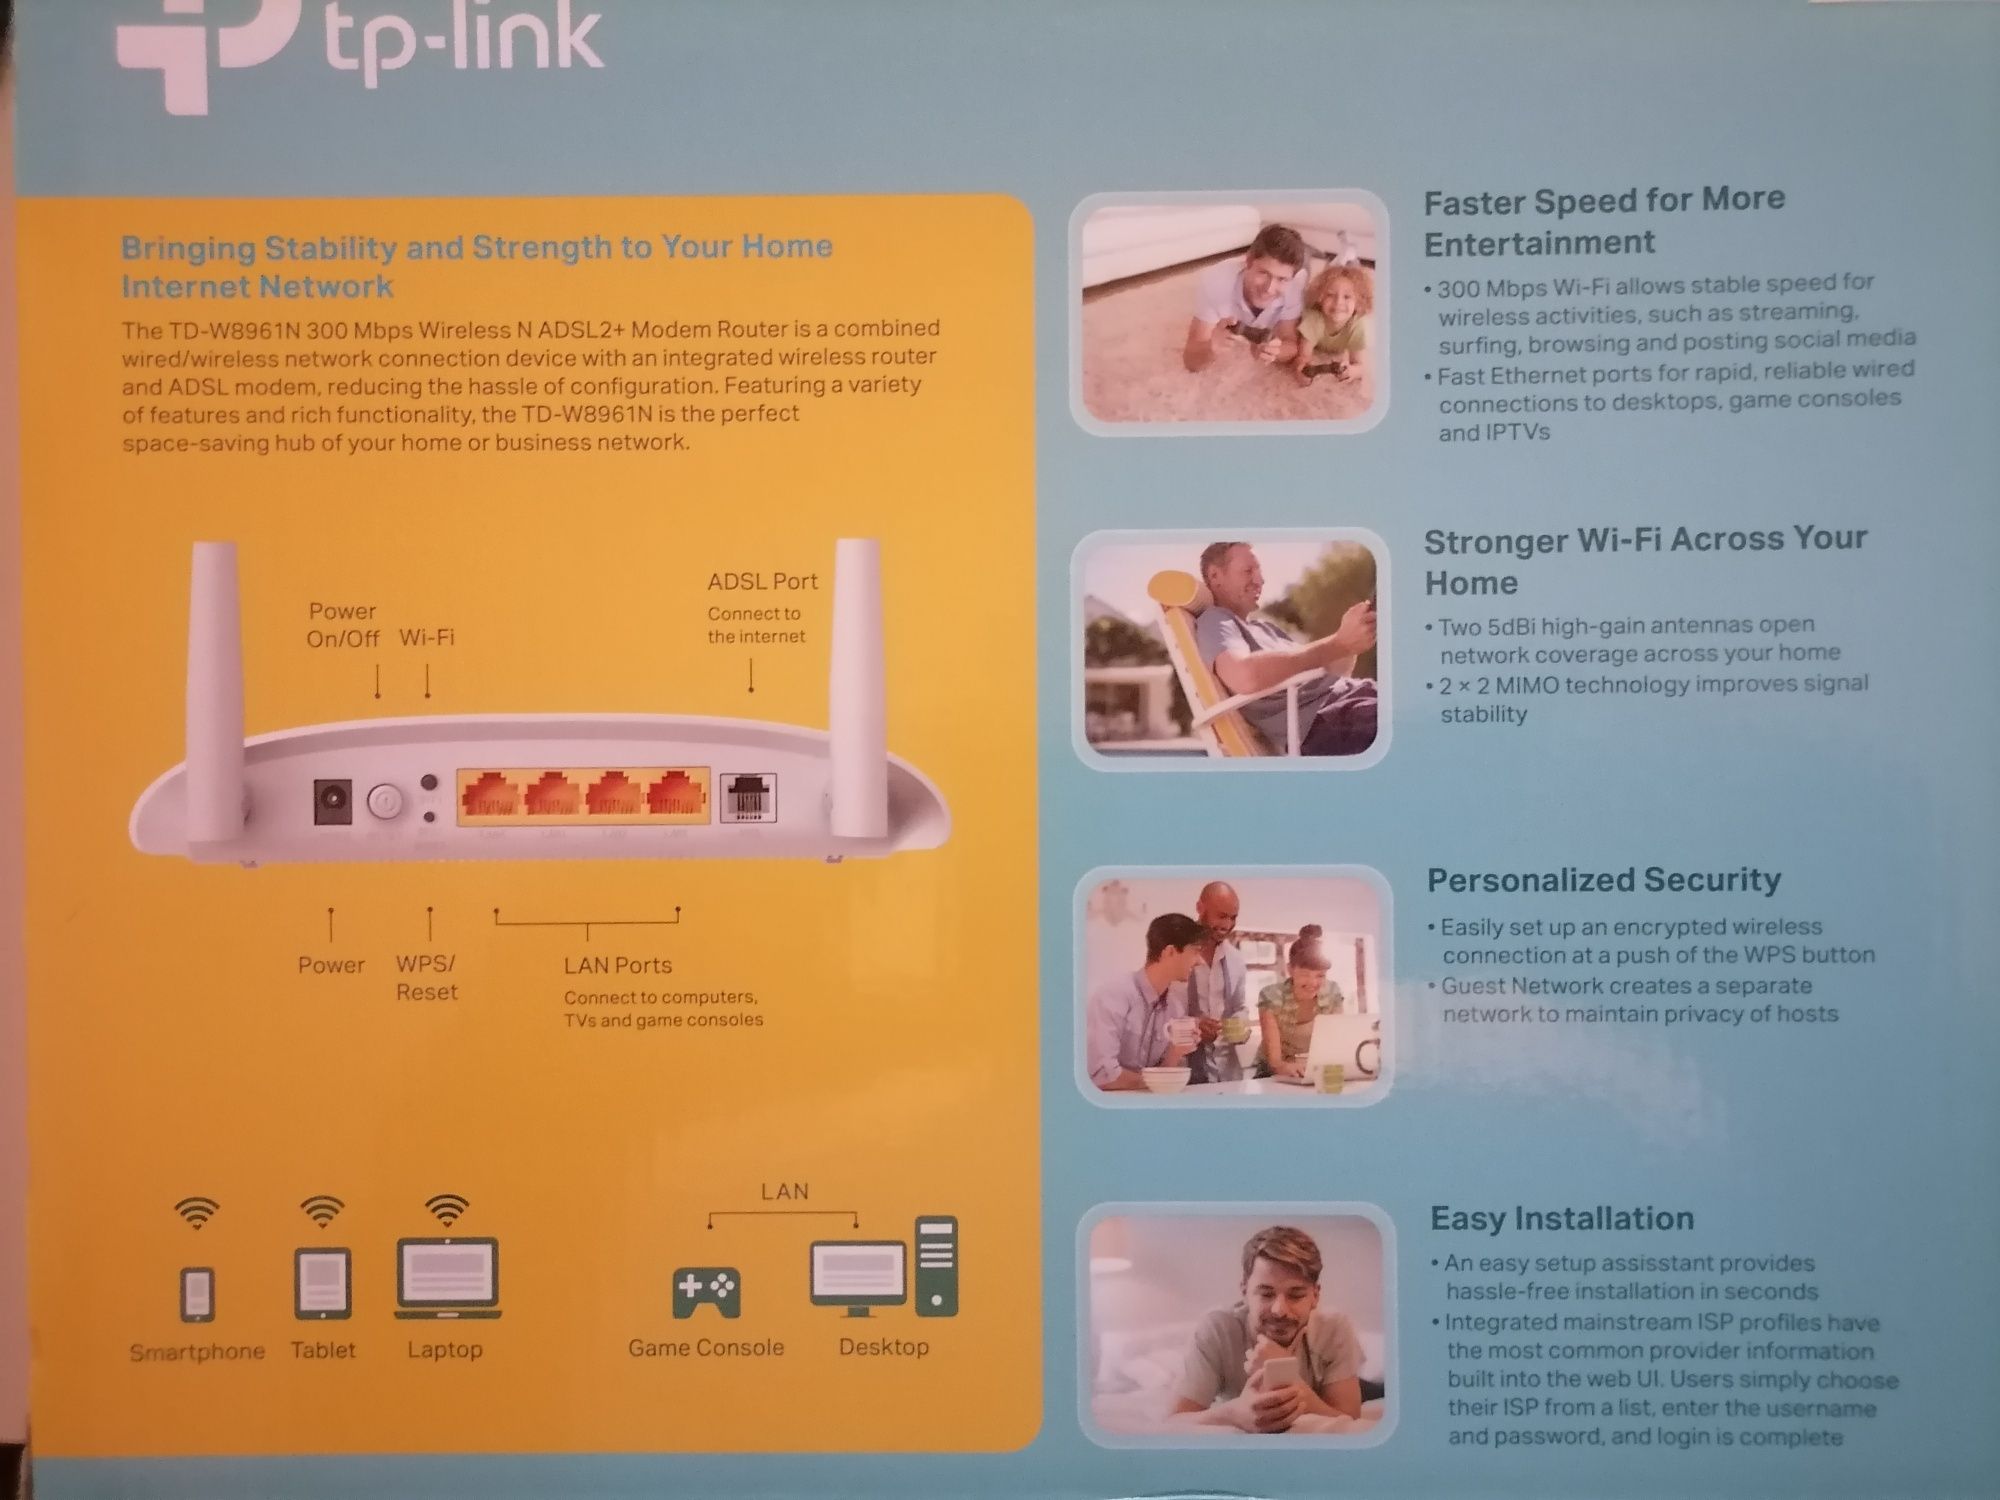 Router i modem TP link nowy